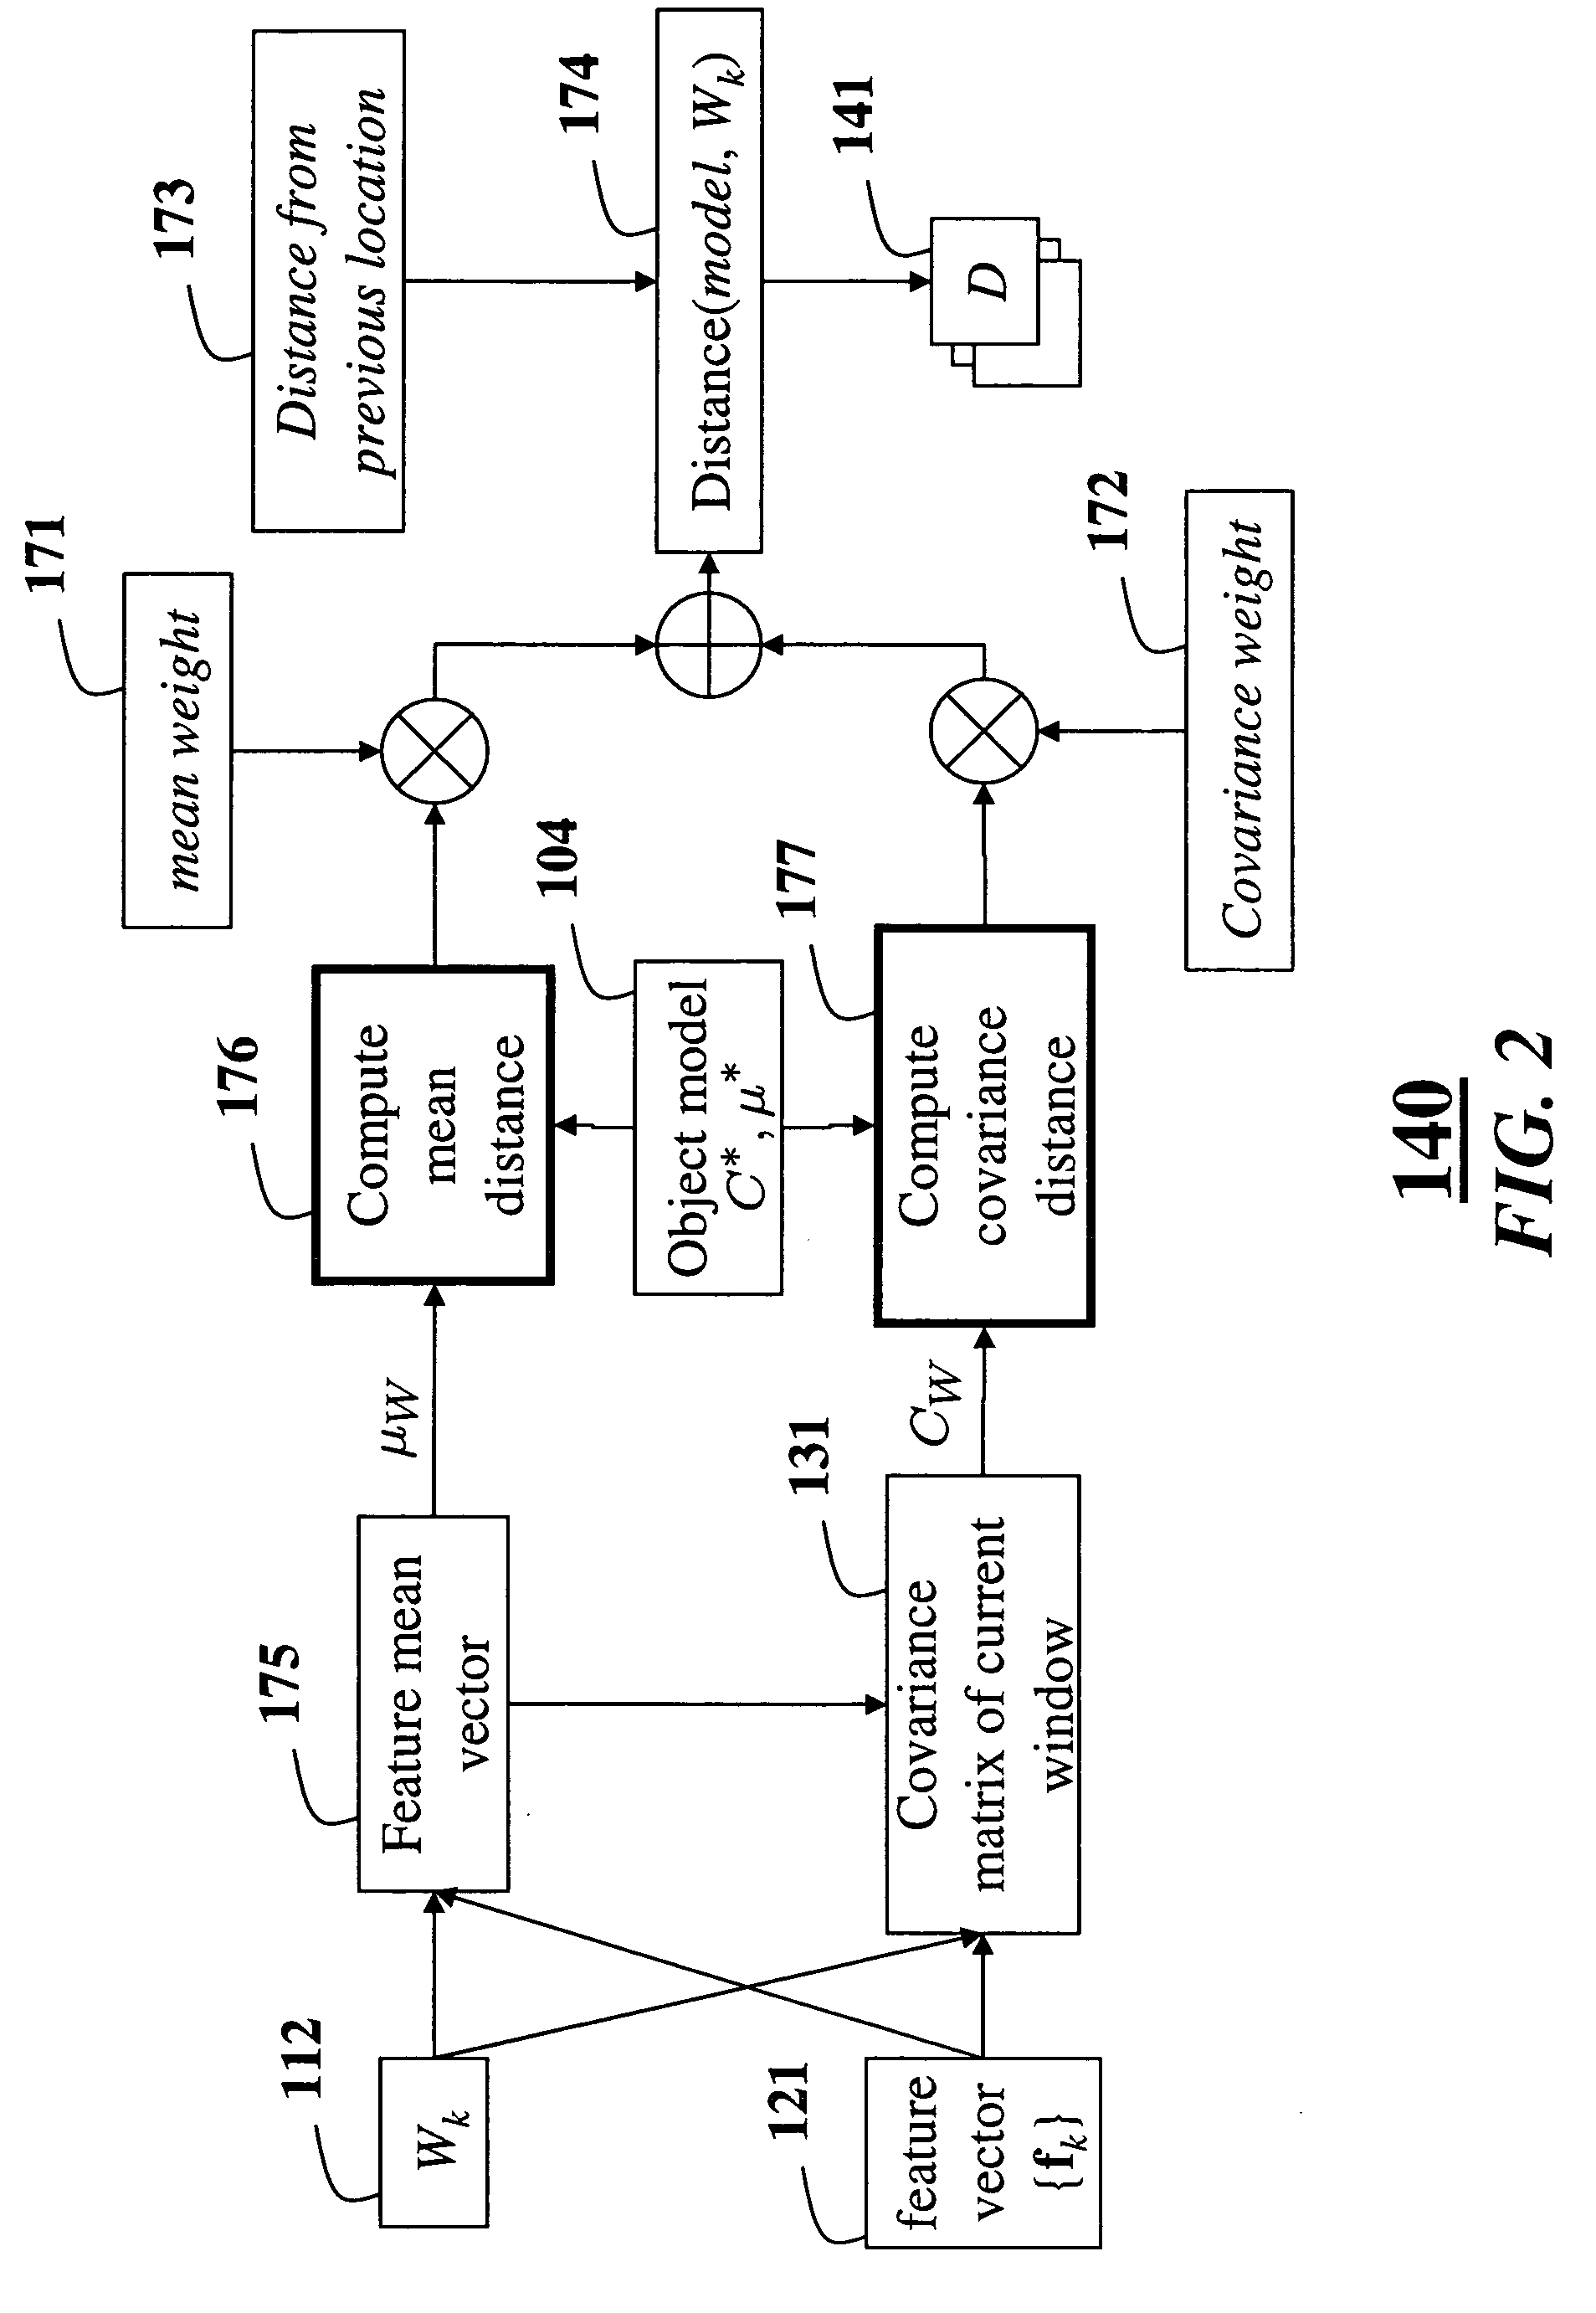 Method for tracking objects in videos using covariance matrices